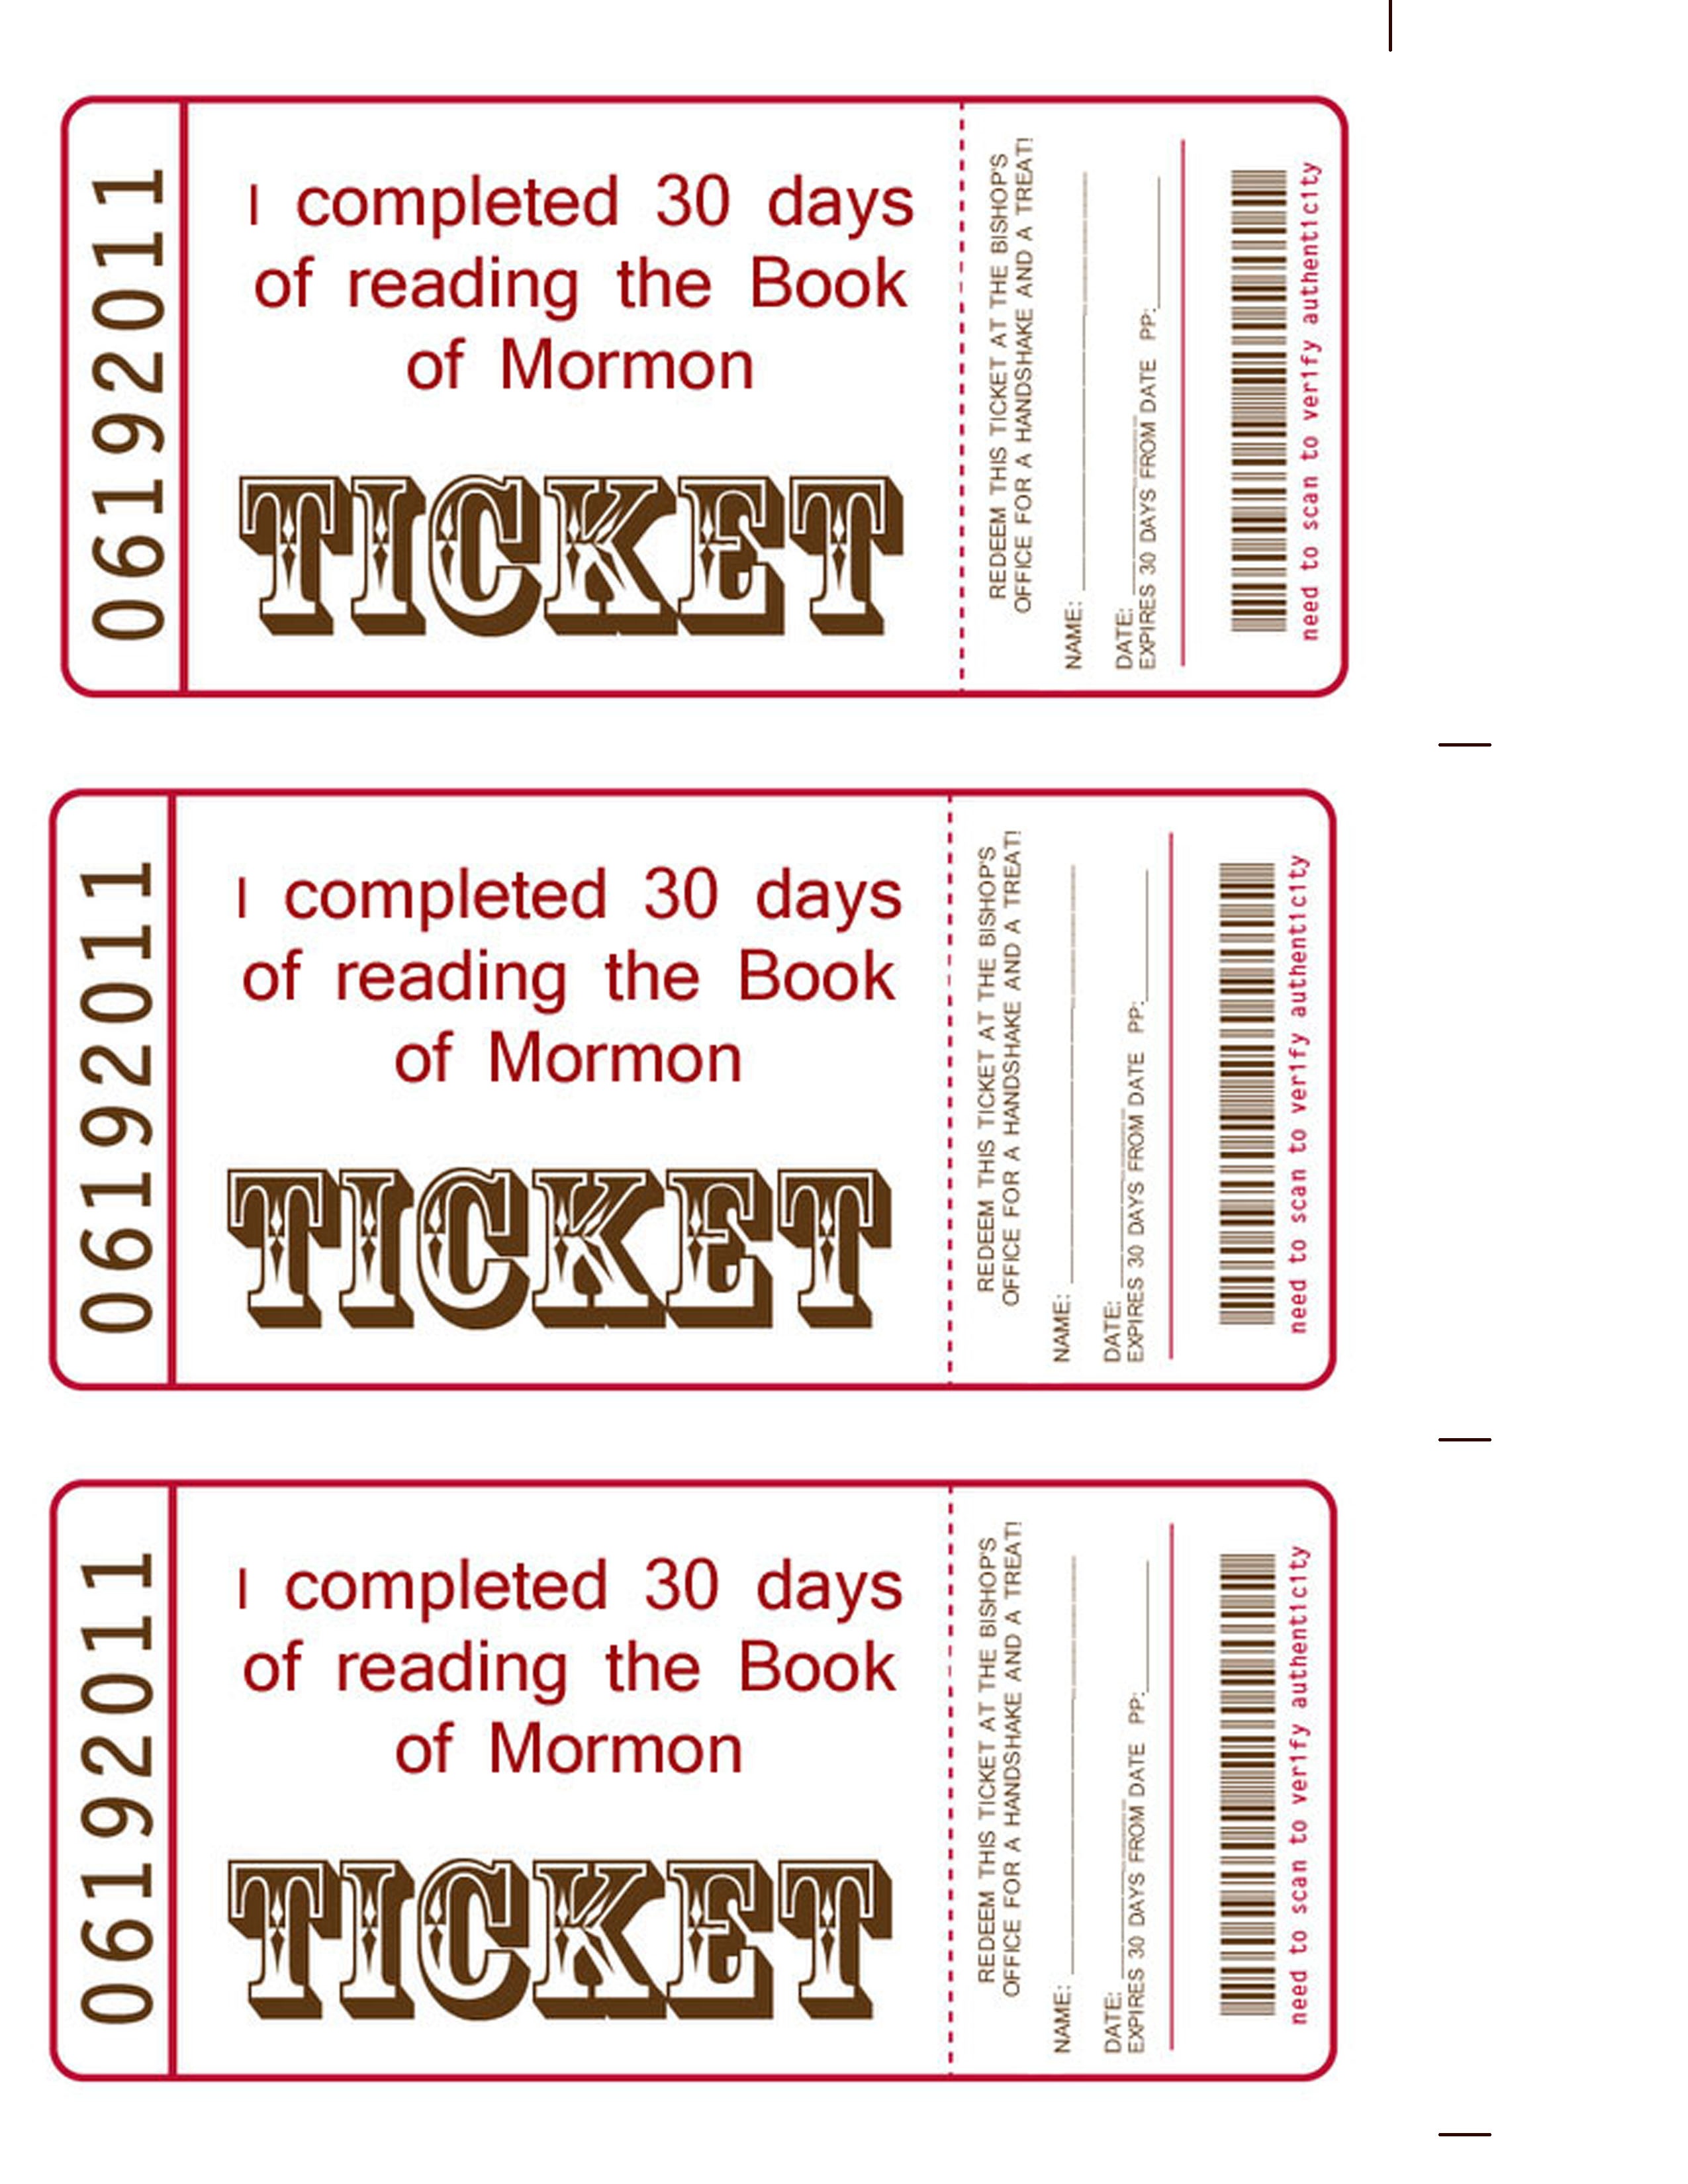 004 Print Tickets Free Template Ideas Brilliant Of Printable Ticket - Create Tickets Free Printable